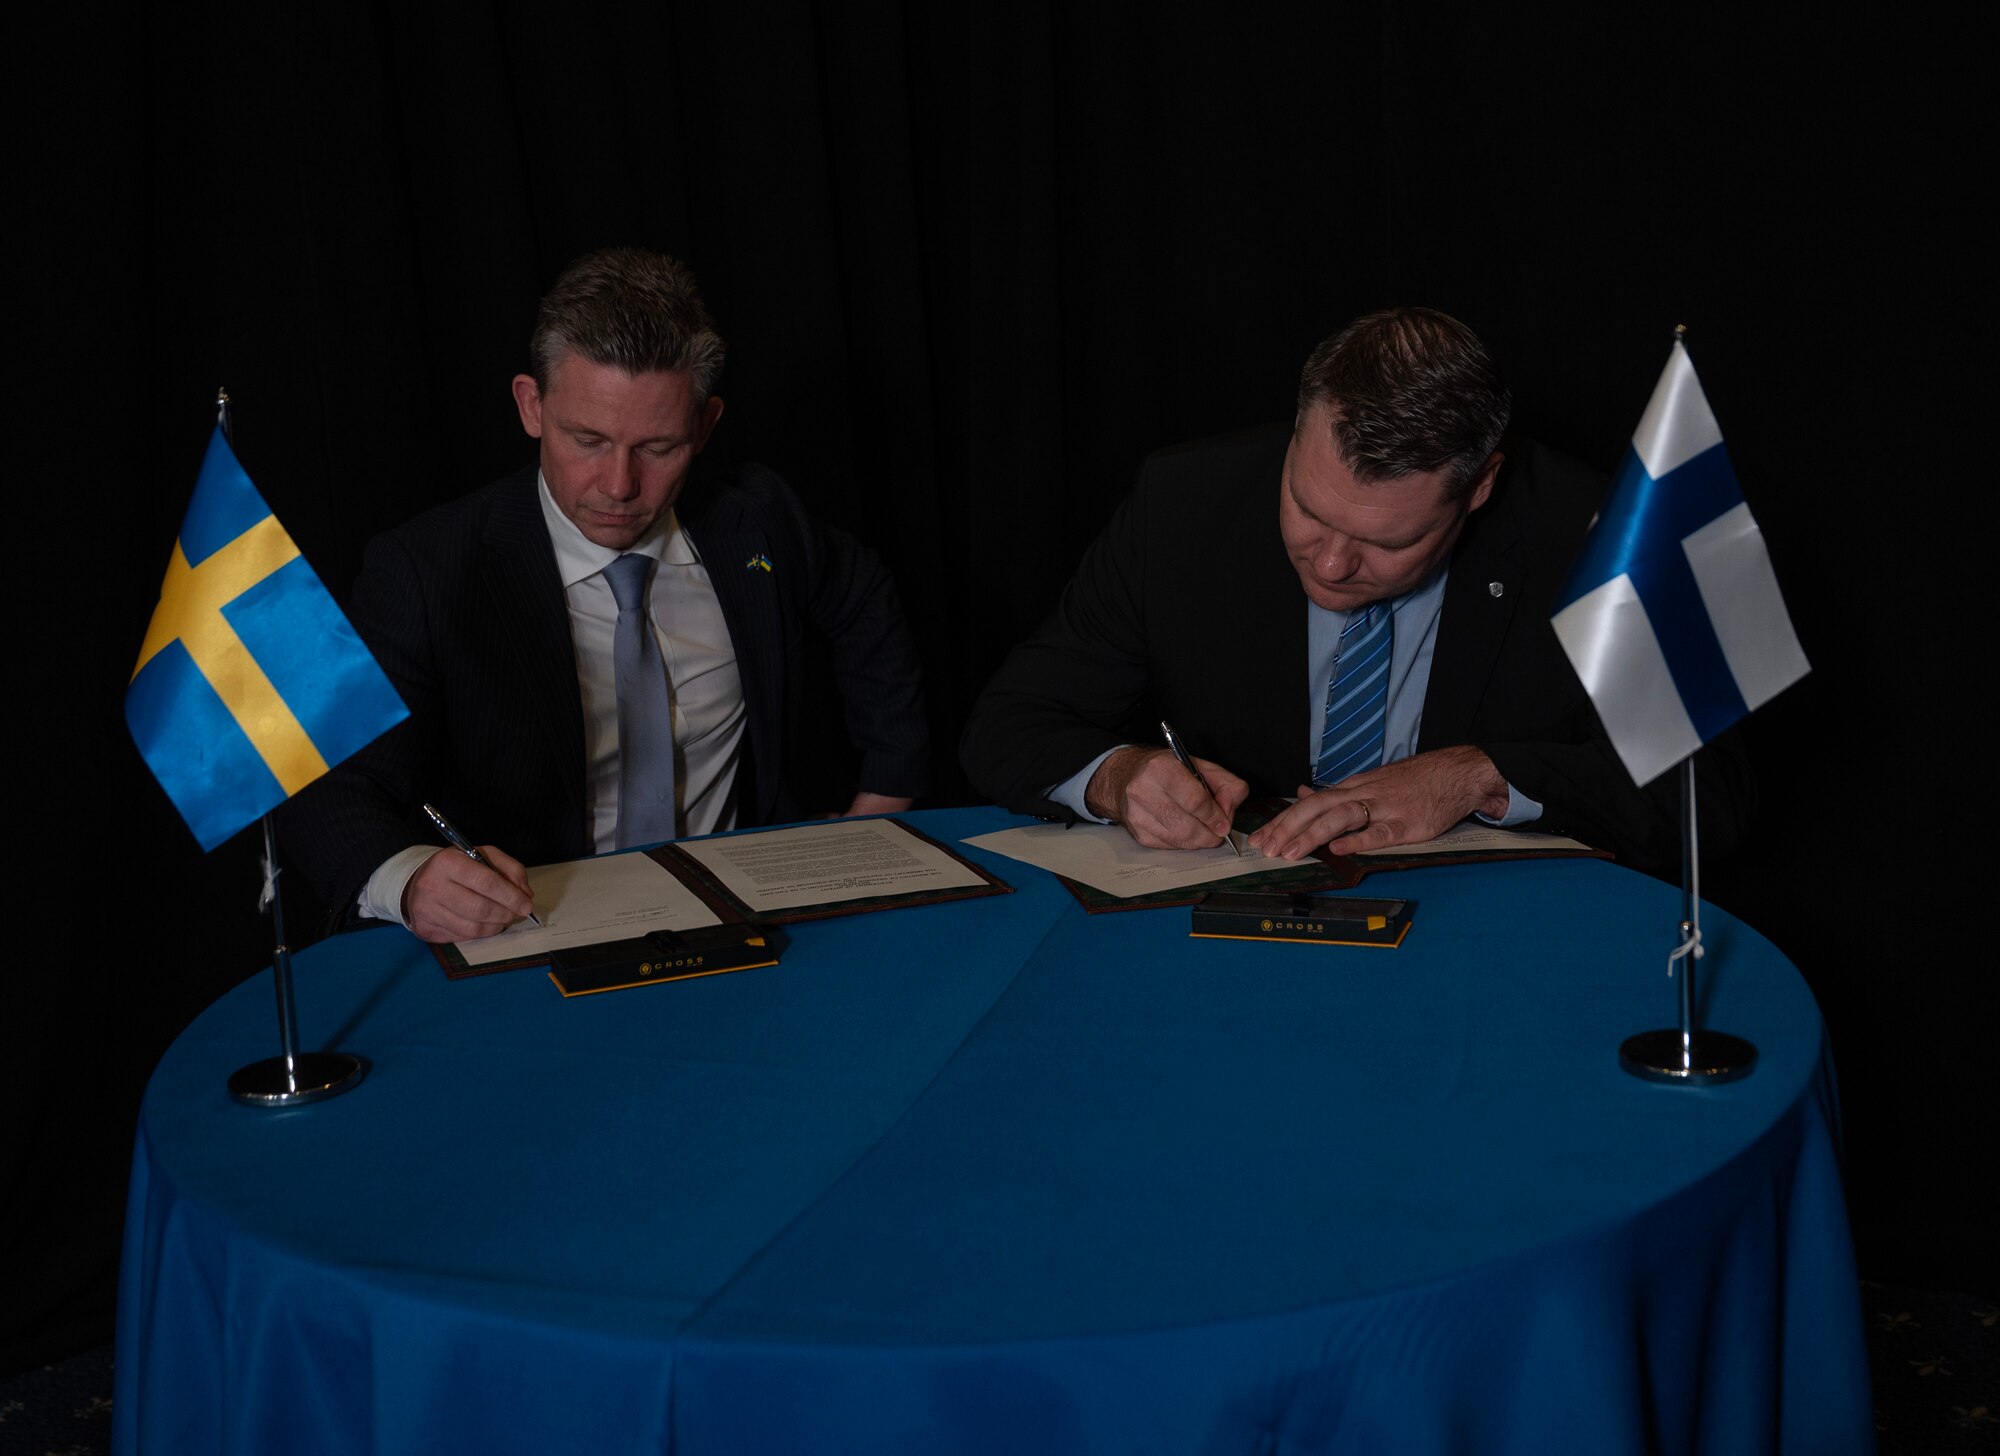 Swedish Minister of Defence Pål Jonson and Finnish Minister of Defence Antti Kaikkonen sign a statement of intent during the Ukraine Defense Contact Group at Ramstein Air Base, Germany